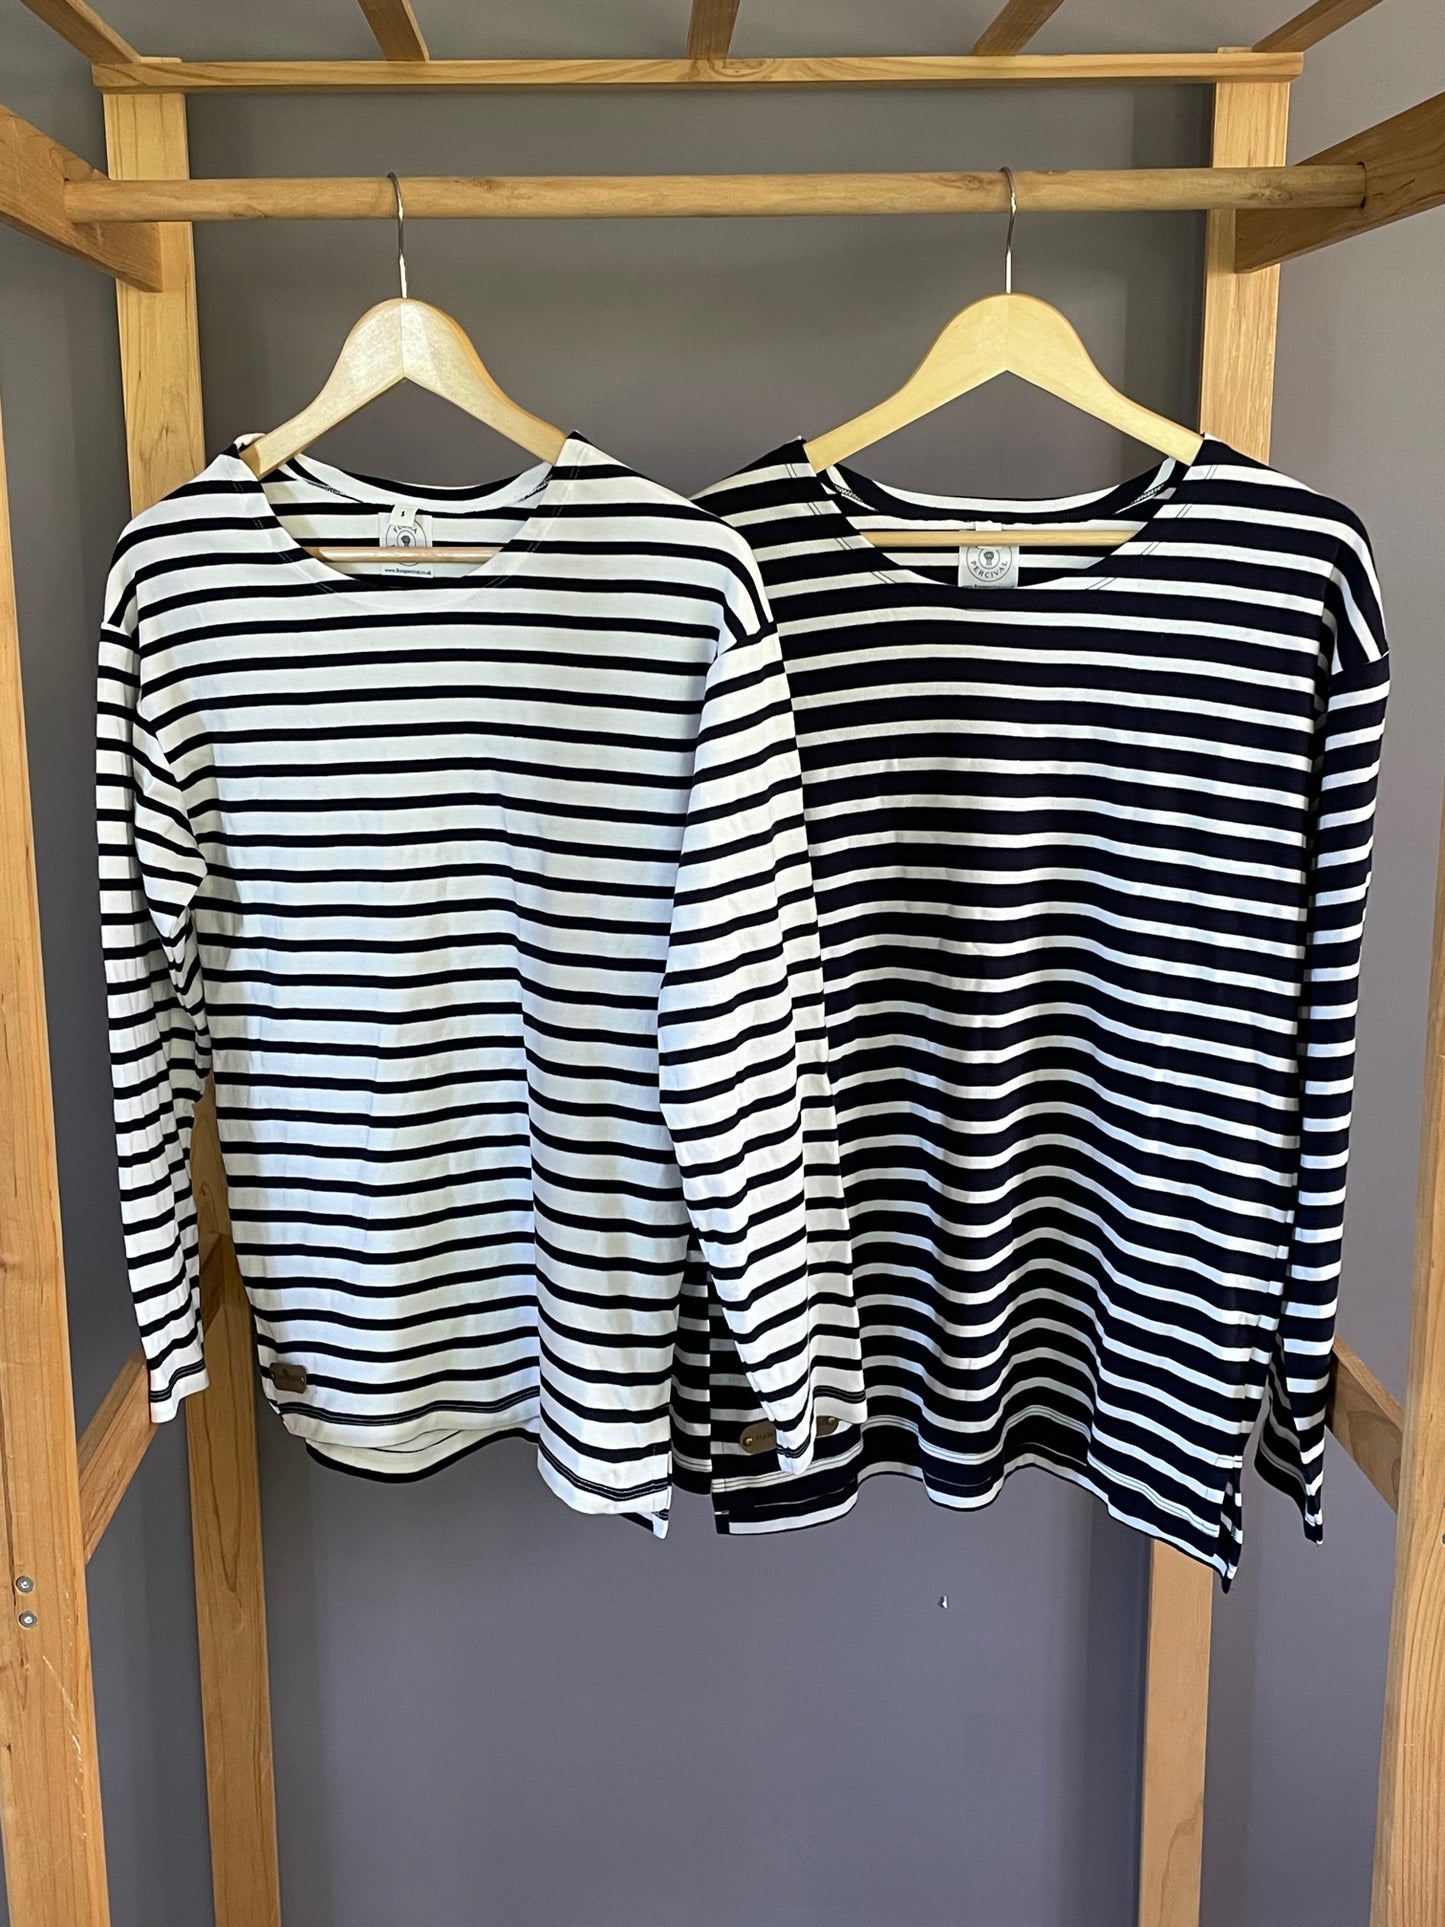 The Langport - Long Sleeved Breton Style Top - Navy with White Stripes